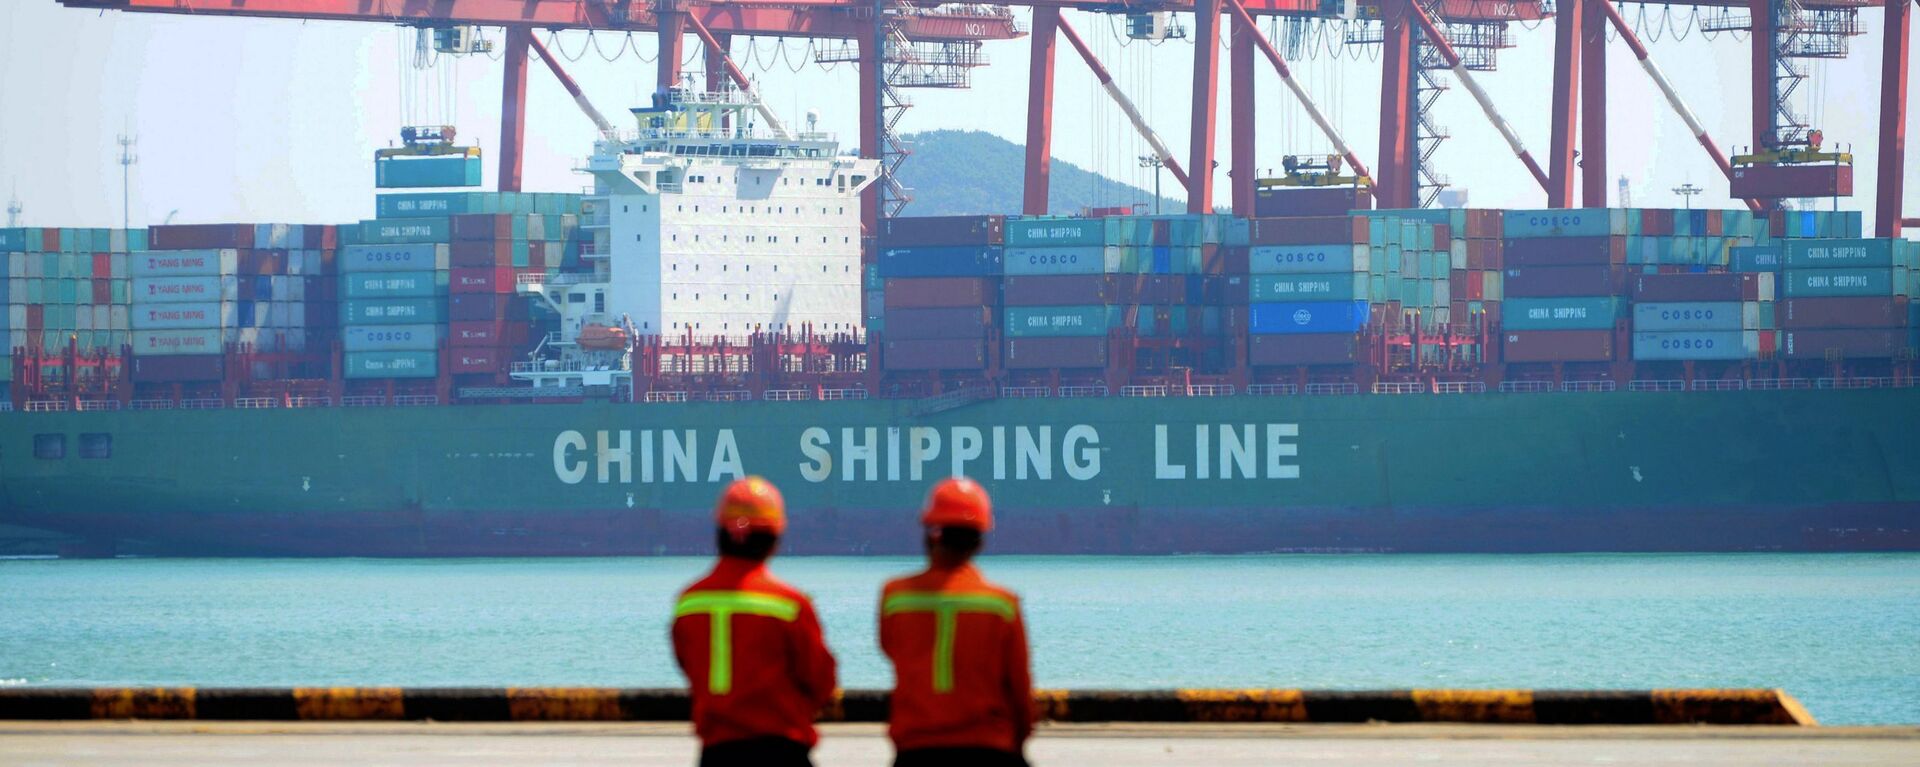 Chinese workers stand on a pier before a cargo ship at a port in Qingdao, east China's Shandong province on April 13, 2017 - Sputnik International, 1920, 29.12.2020